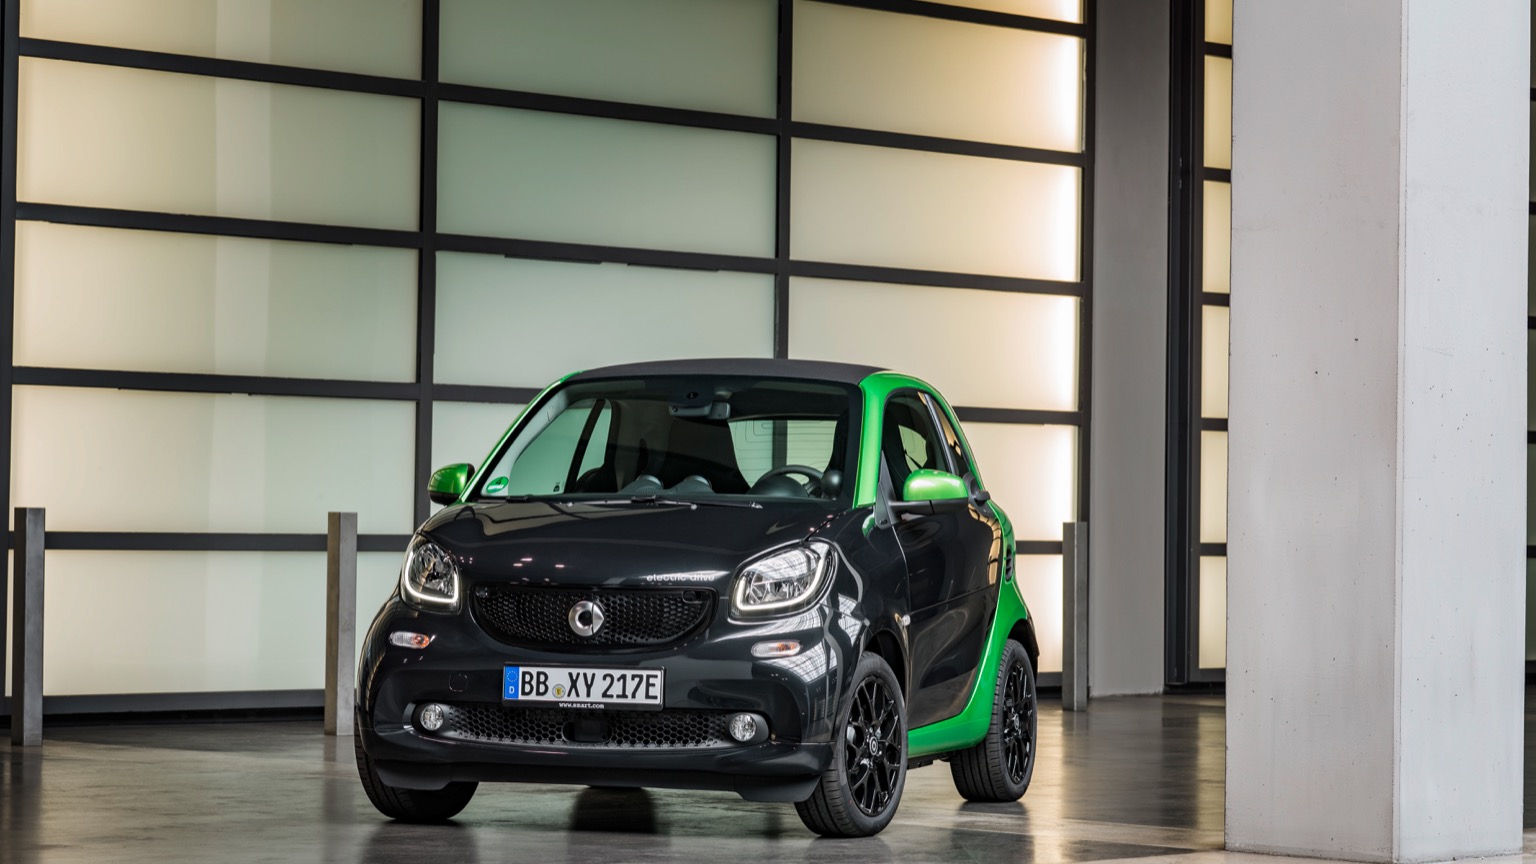 Smart_fortwo-10